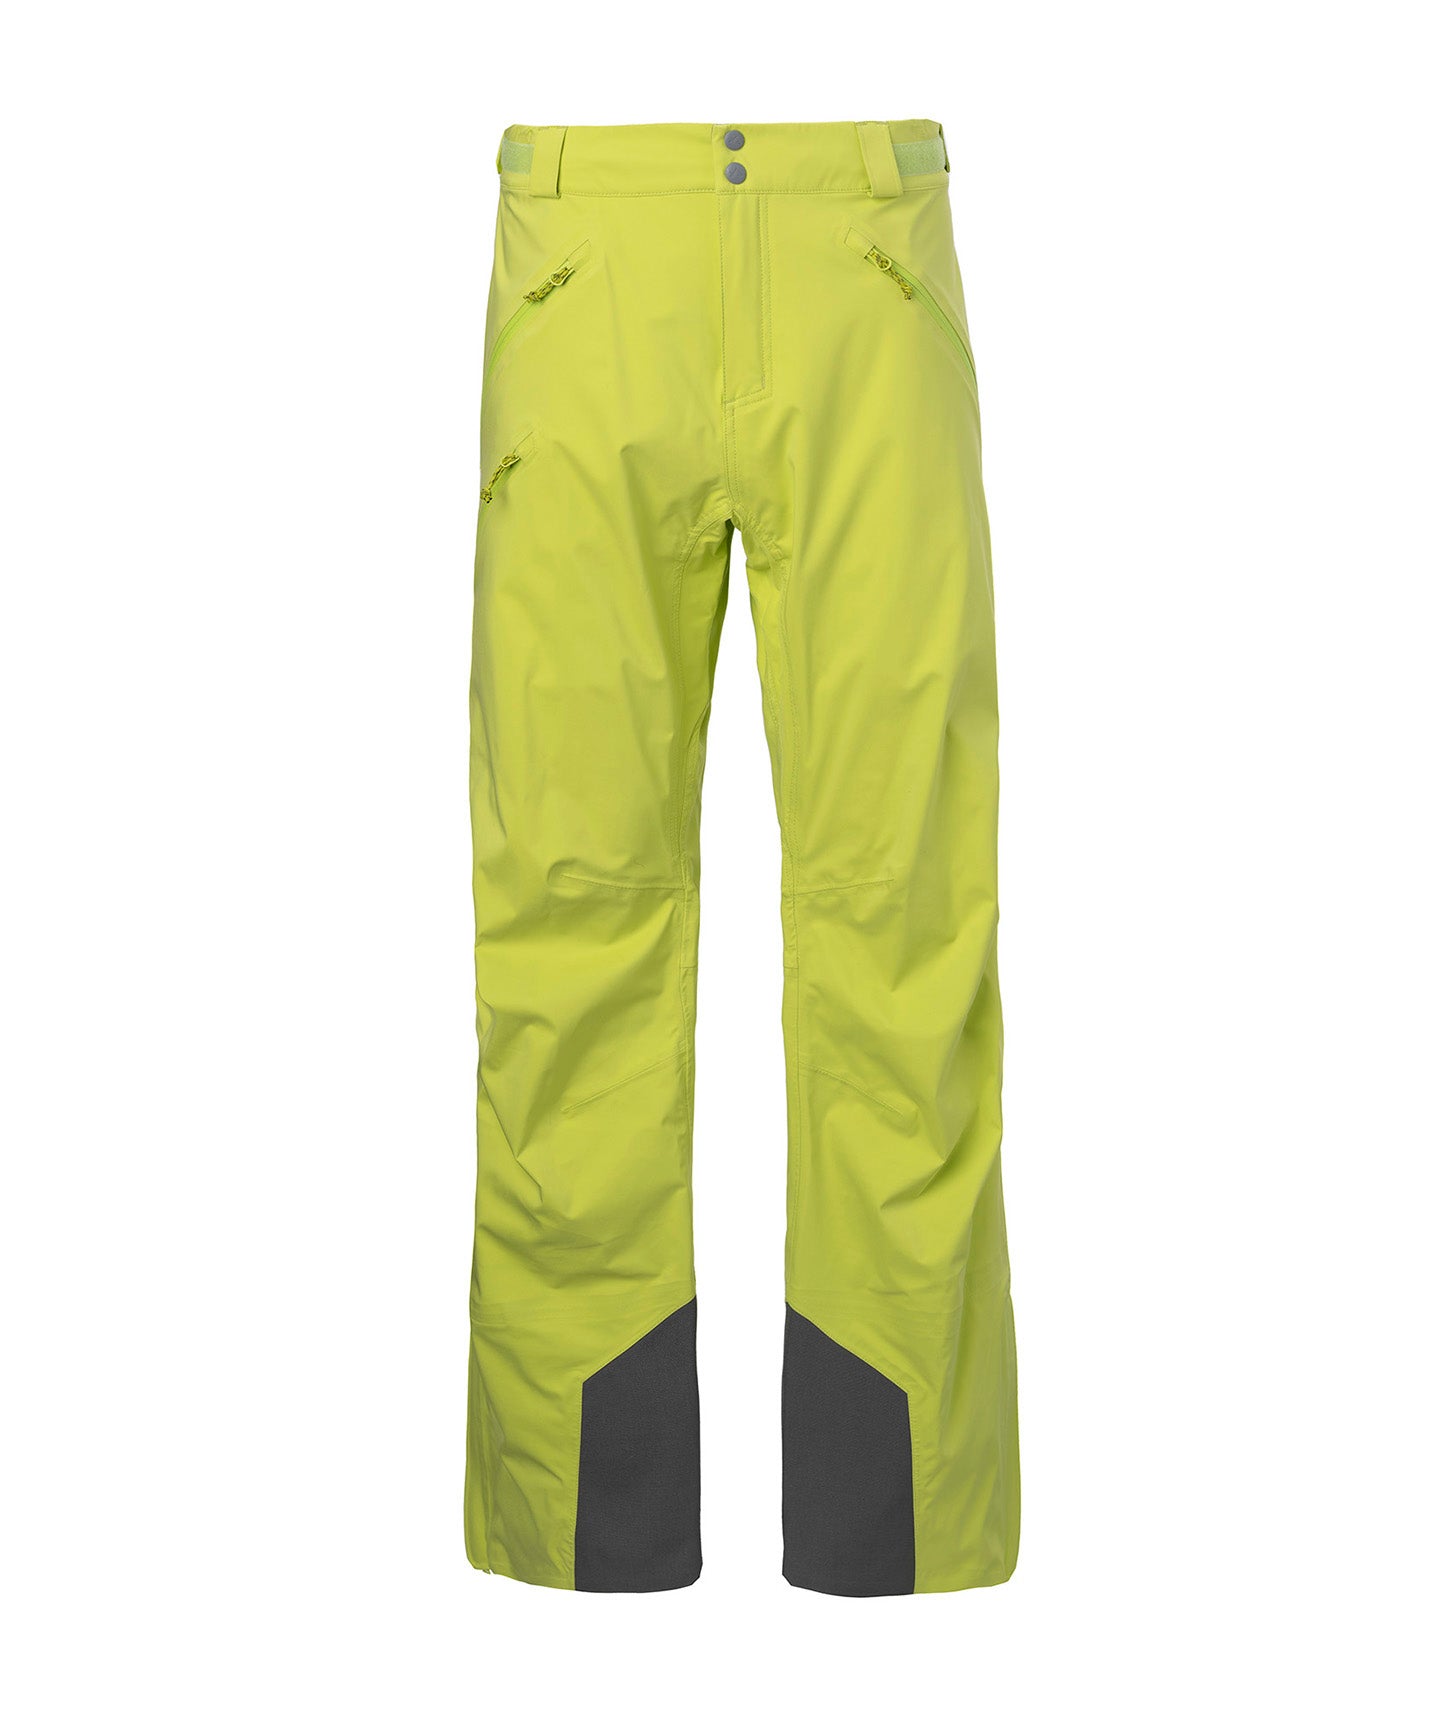 studio image of strafe outerwear 2023 capitol 3l shell pant in battleship color